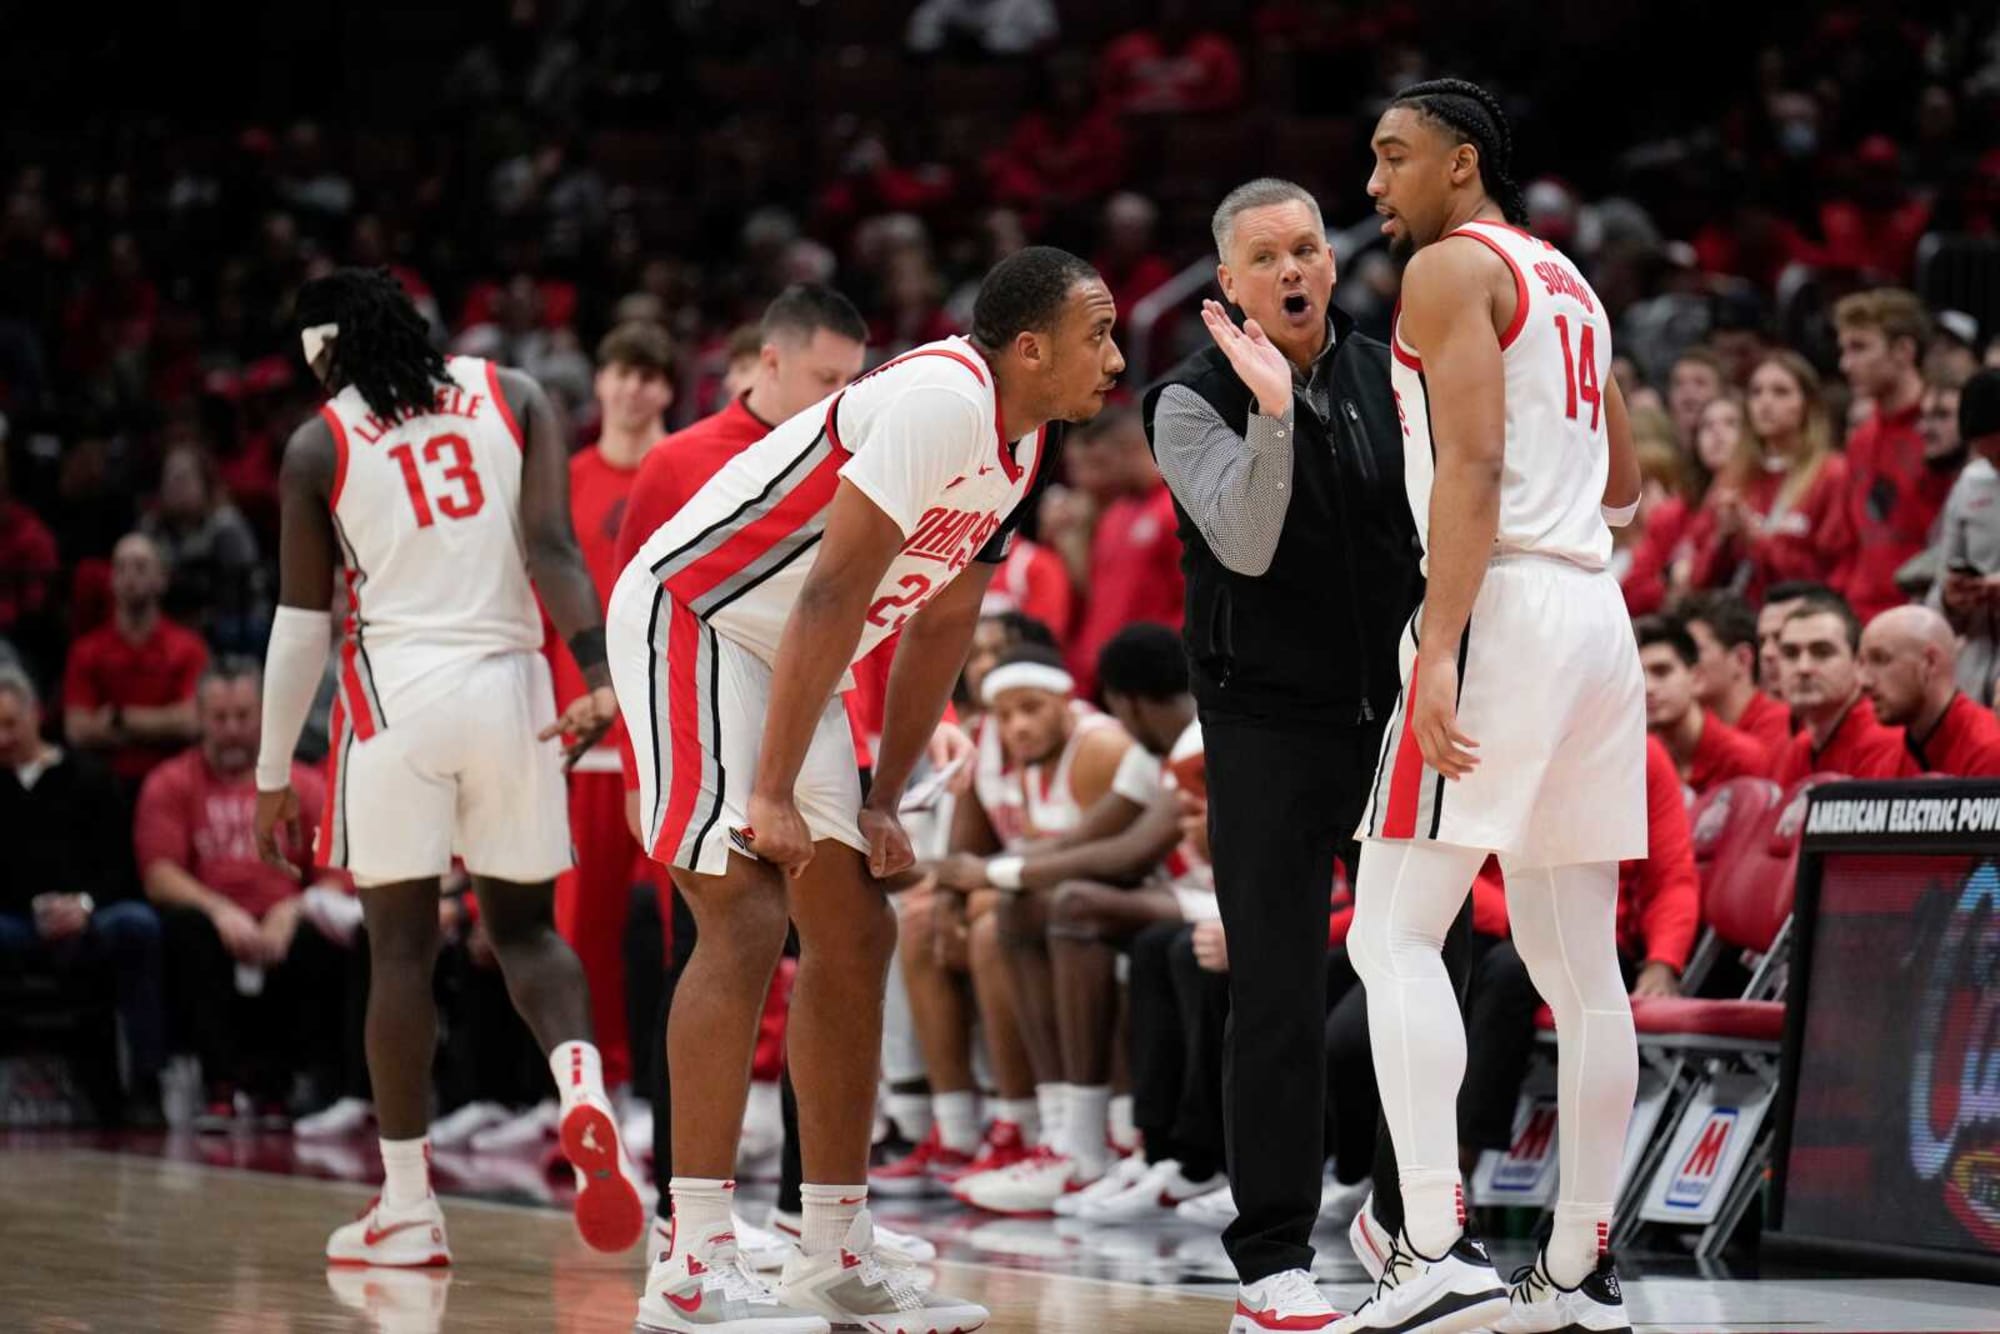 Ohio State basketball Who they have to beat to make March Madness